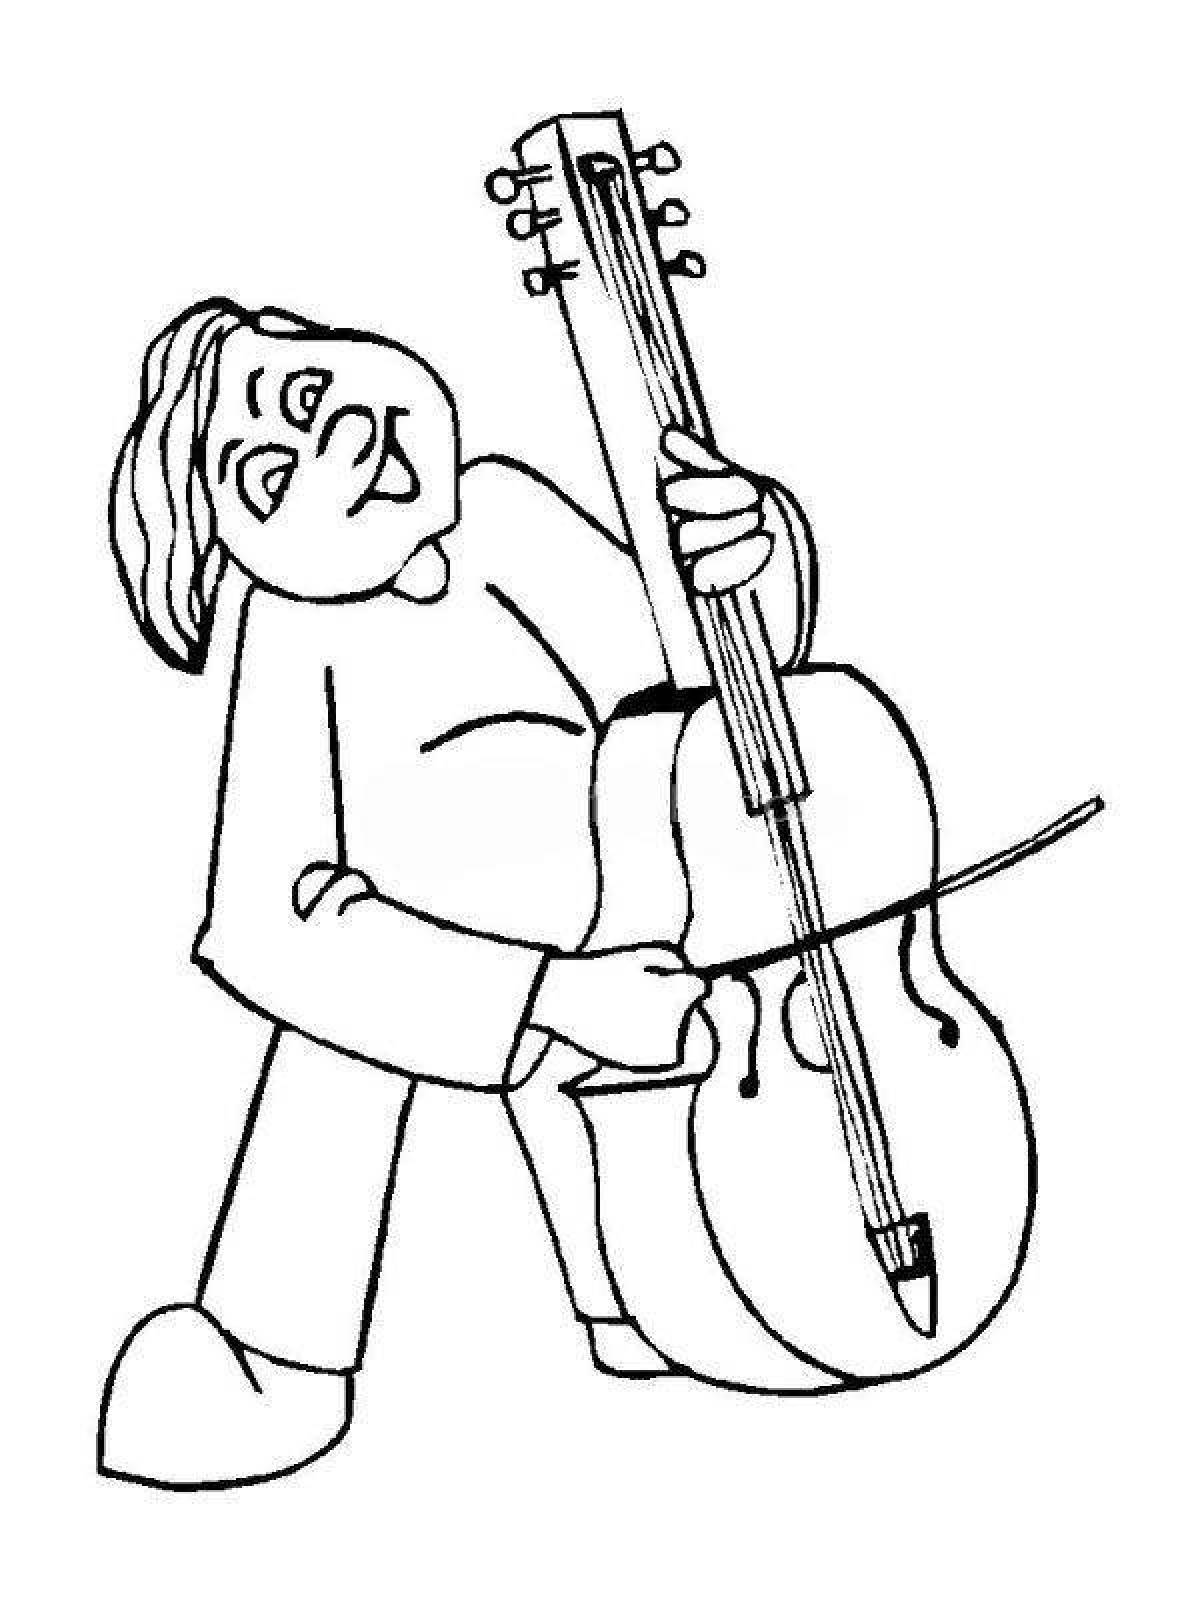 Coloring page charming cello